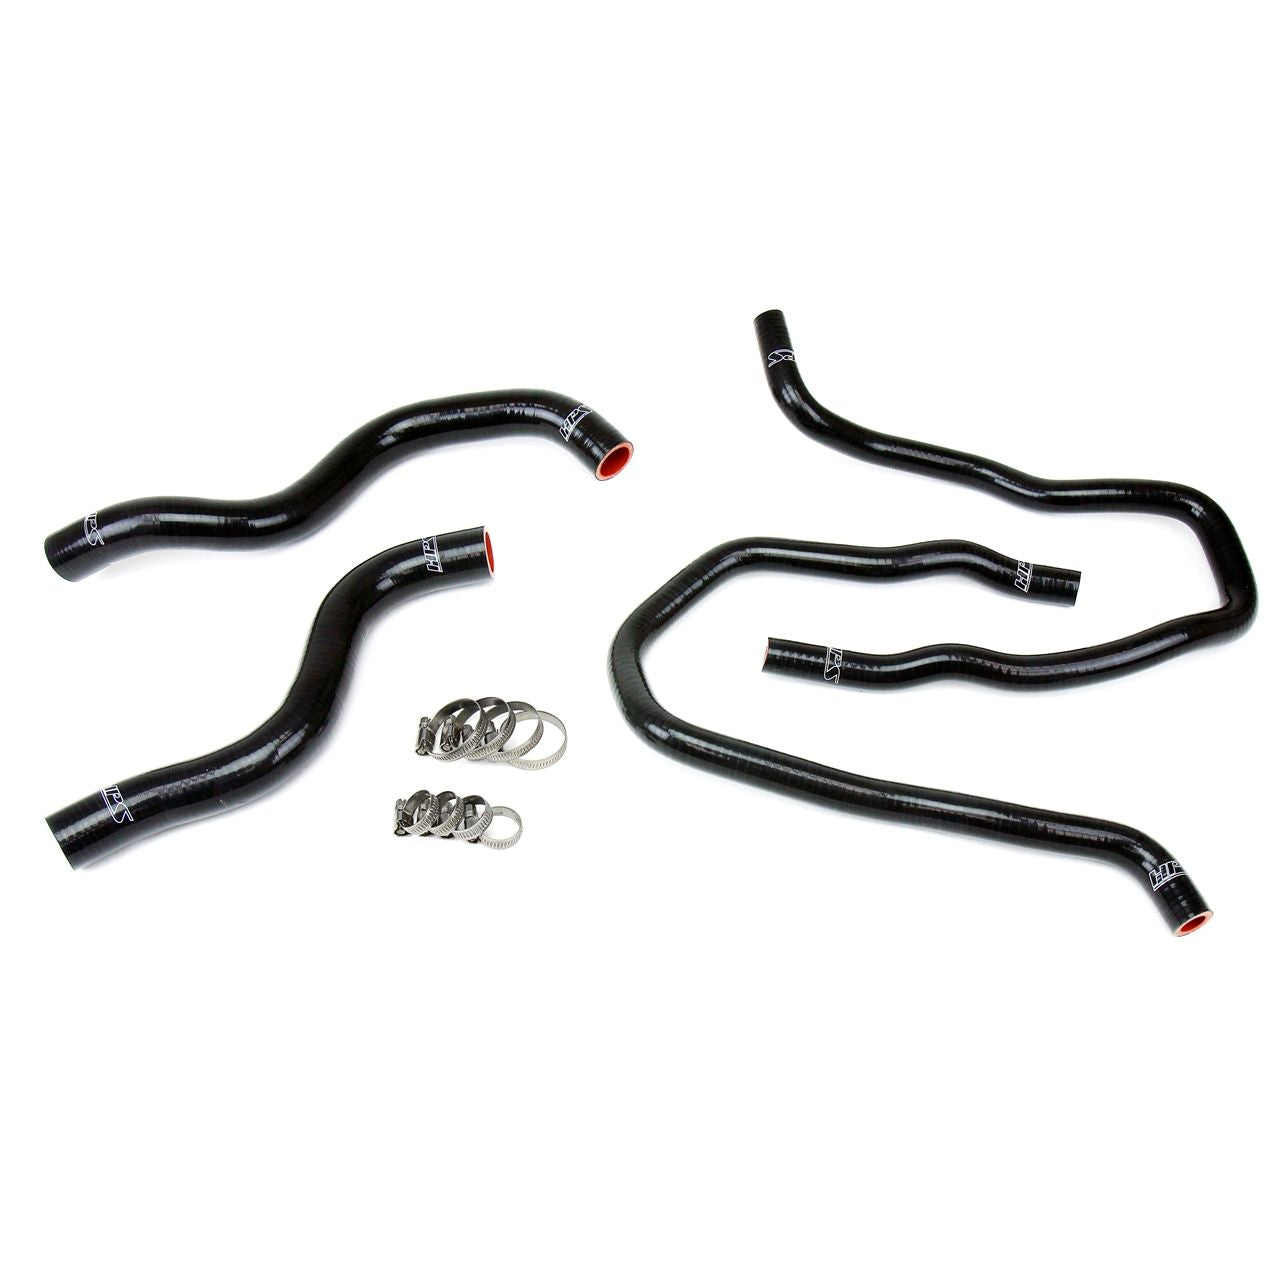 HPS Black Reinforced Silicone Radiator + Heater Hose Kit for Honda 13-17 Accord 2.4L LHD